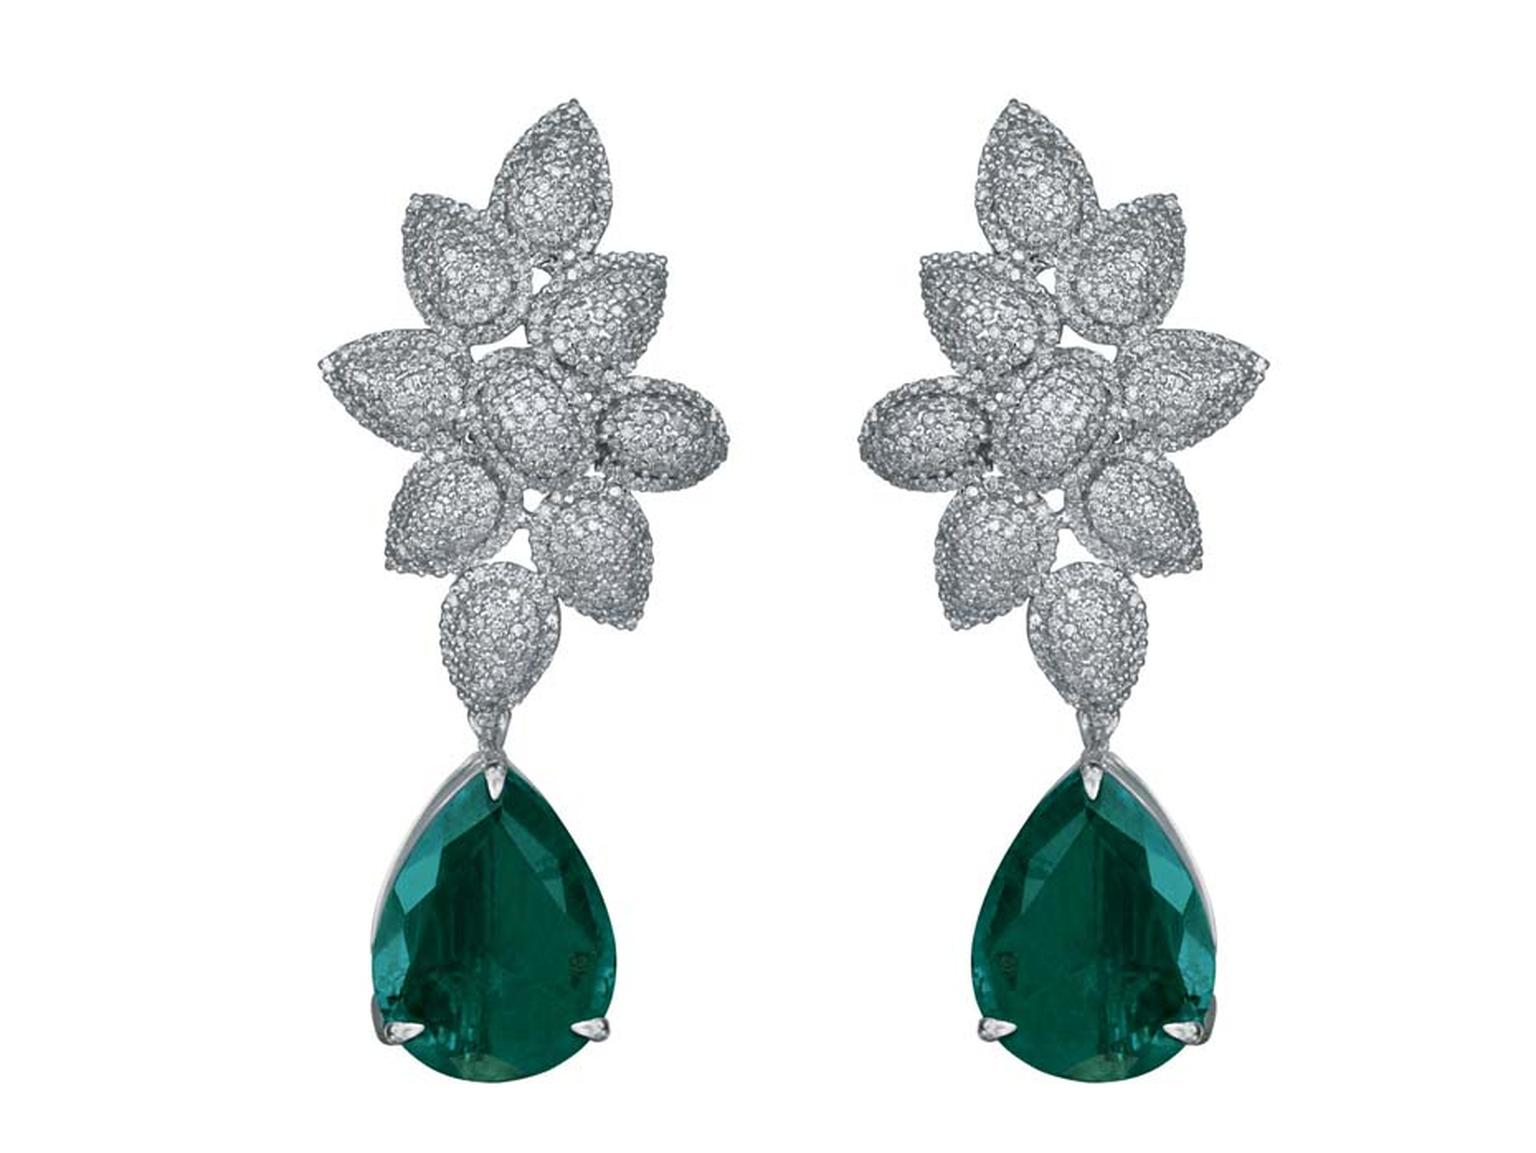 MINAWALA Festival of Emeralds collection earrings in white gold with diamonds and emeralds